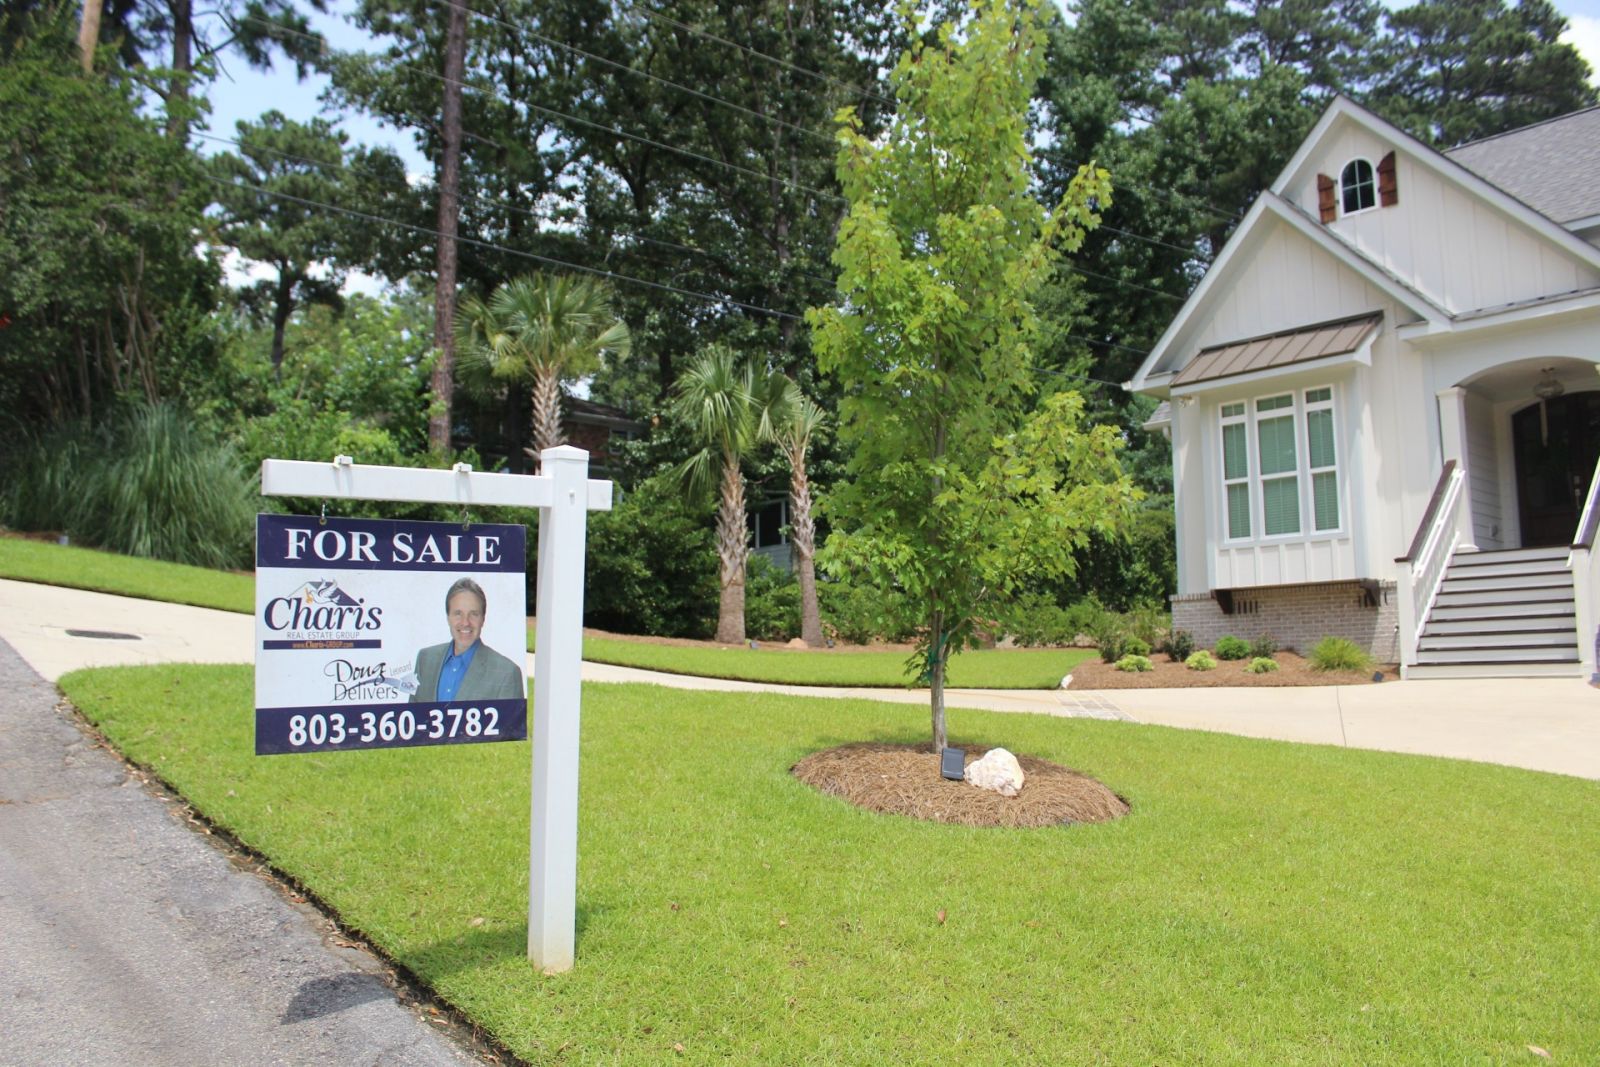 For Sale signs are a common sight in most Columbia neighborhoods as demand for homes continues to soar. (Photo/Christina Lee Knauss)